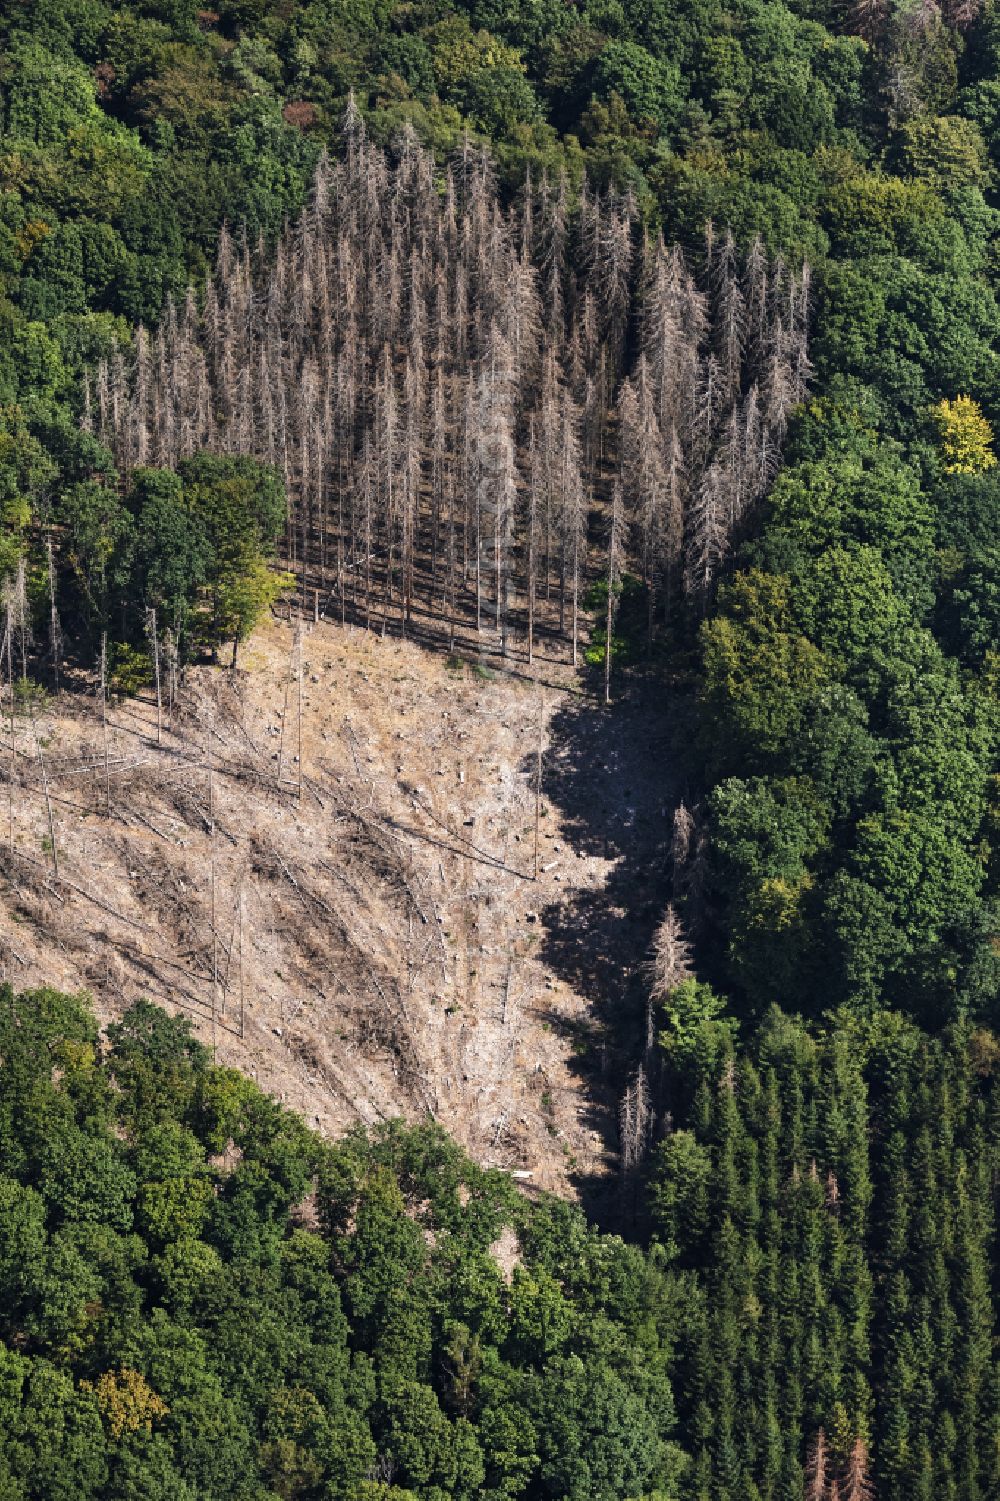 Engelskirchen from the bird's eye view: Tree dying and forest dying with skeletons of dead trees in the remnants of a forest area in Engelskirchen in the state North Rhine-Westphalia, Germany